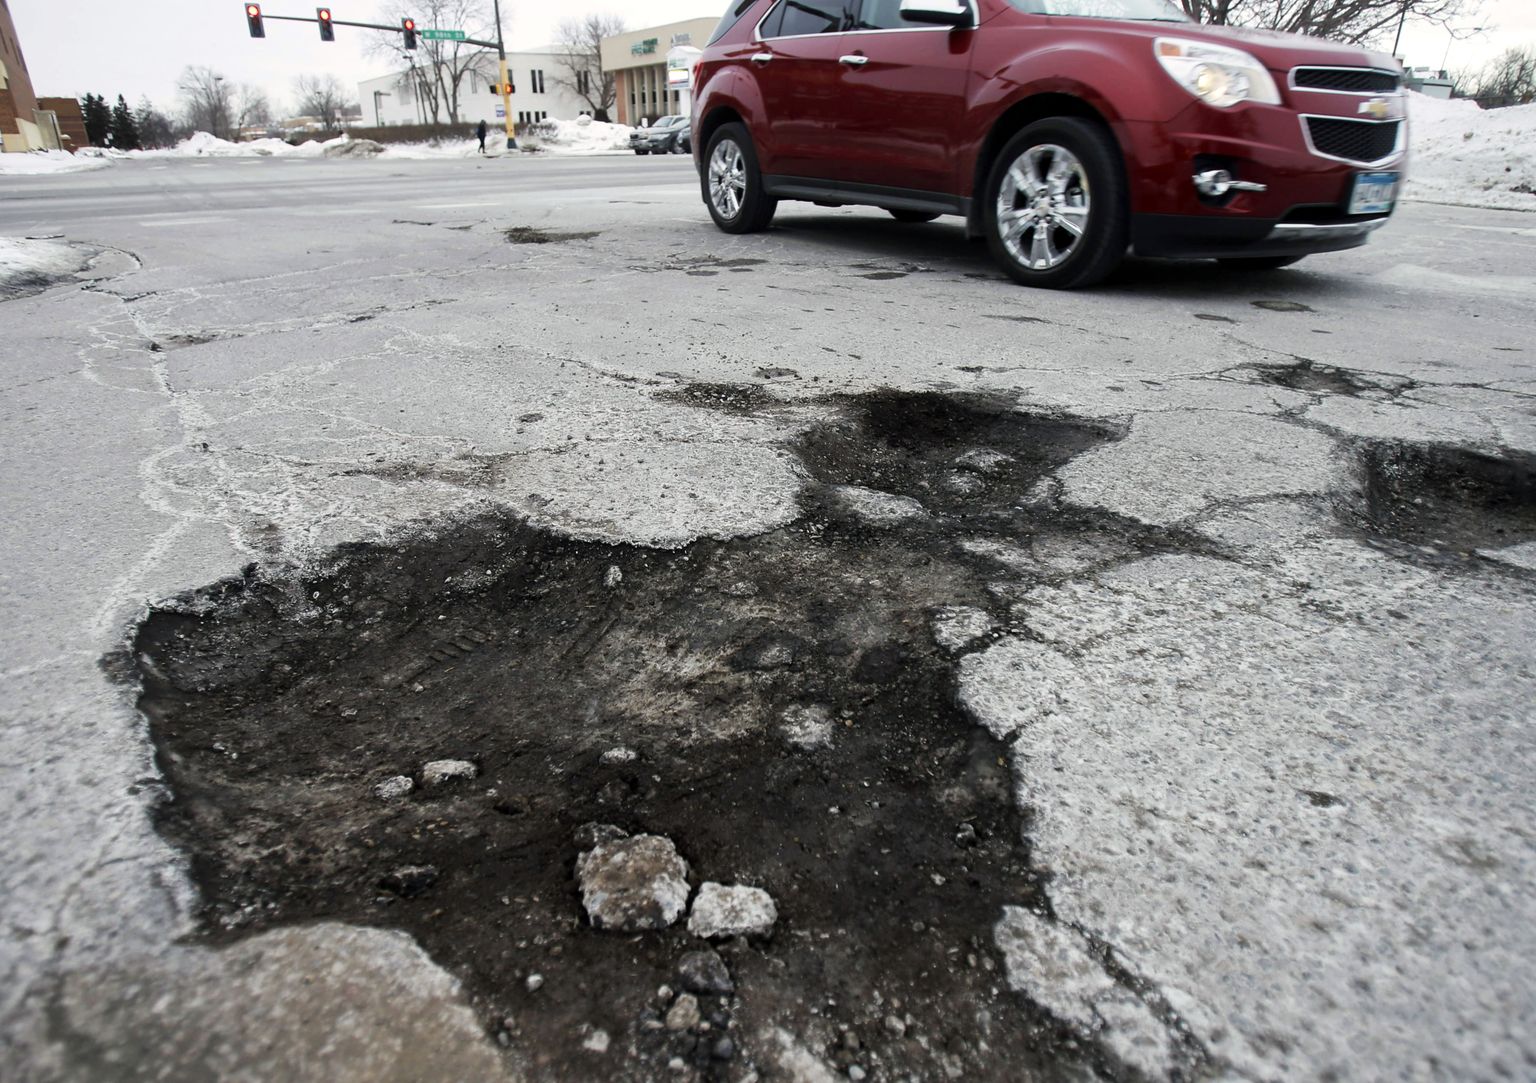 In this Tuesday, Feb. 11, 2014 photo, a driver navigates past several potholes in Bloomington, Minn. The relentless cycle of snow and bitter cold this winter is testing the skeletons of steel and cement on which communities are built. Pipes are bursting in towns that are not used to such things, and roads are turning into moonscapes of gaping potholes big enough to snap axles of passing vehicles. (AP Photo/Jim Mone) / TT / kod 436